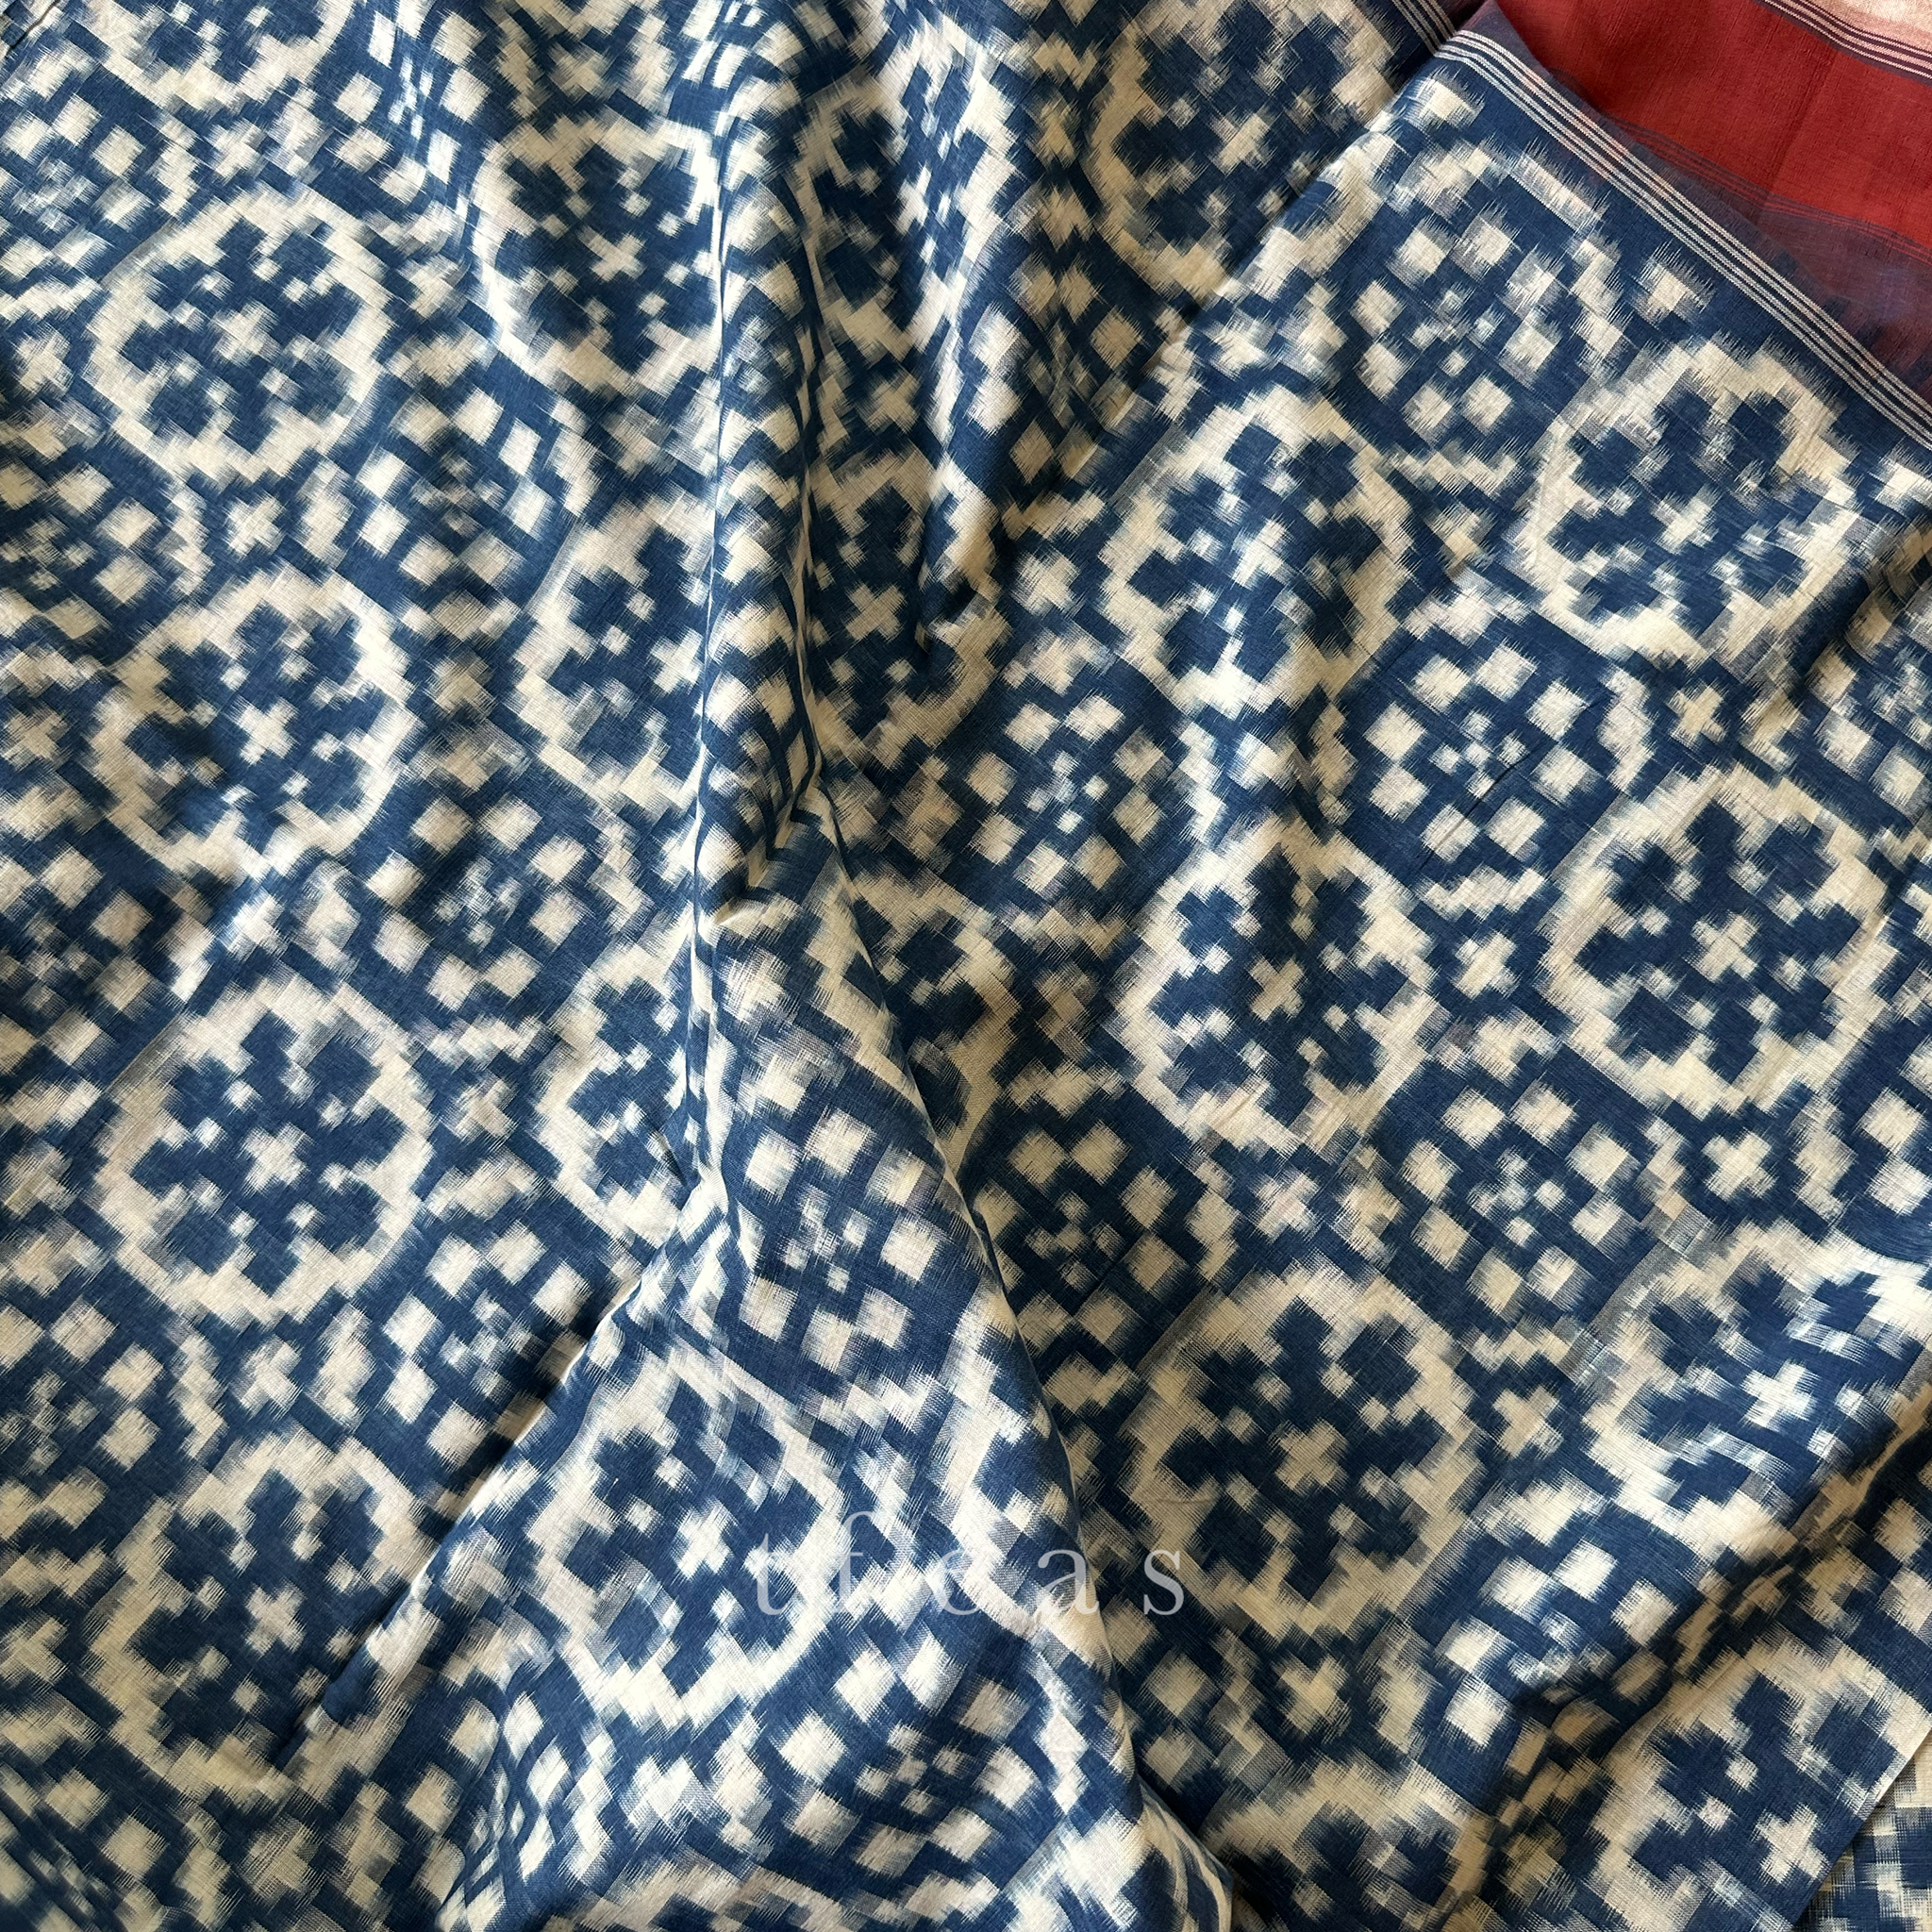 Indigo and Red Natural Dyed Double Ikat